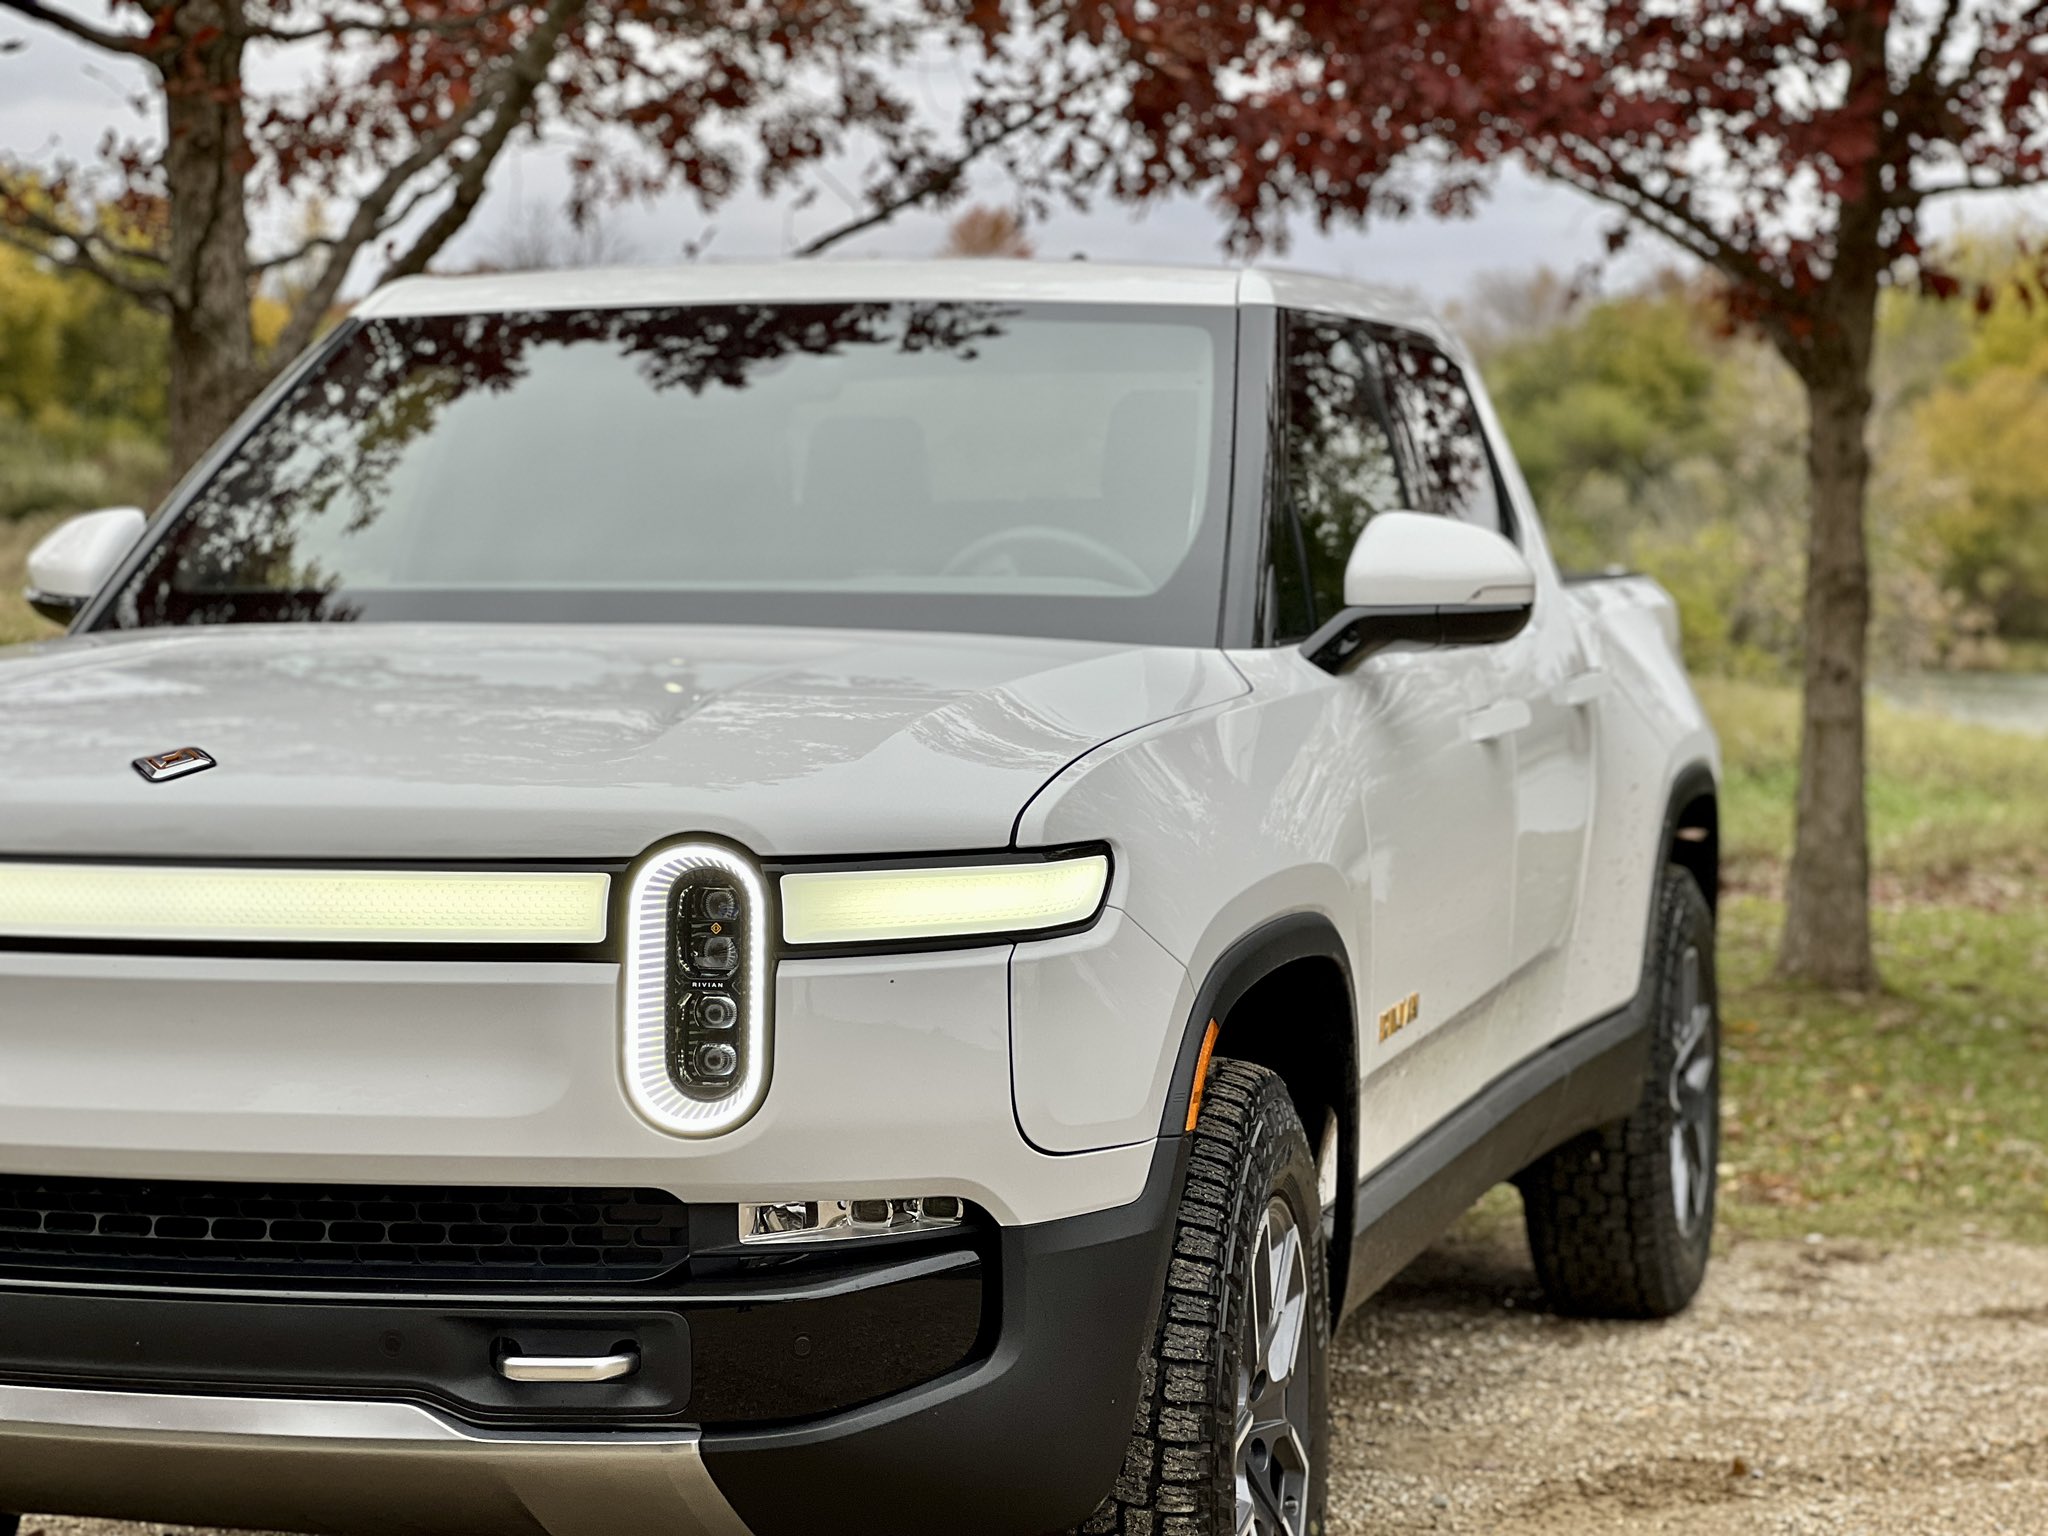 Exploring Alternatives Beyond Canceling Pre-Orders for Rivian's Electric Vehicles